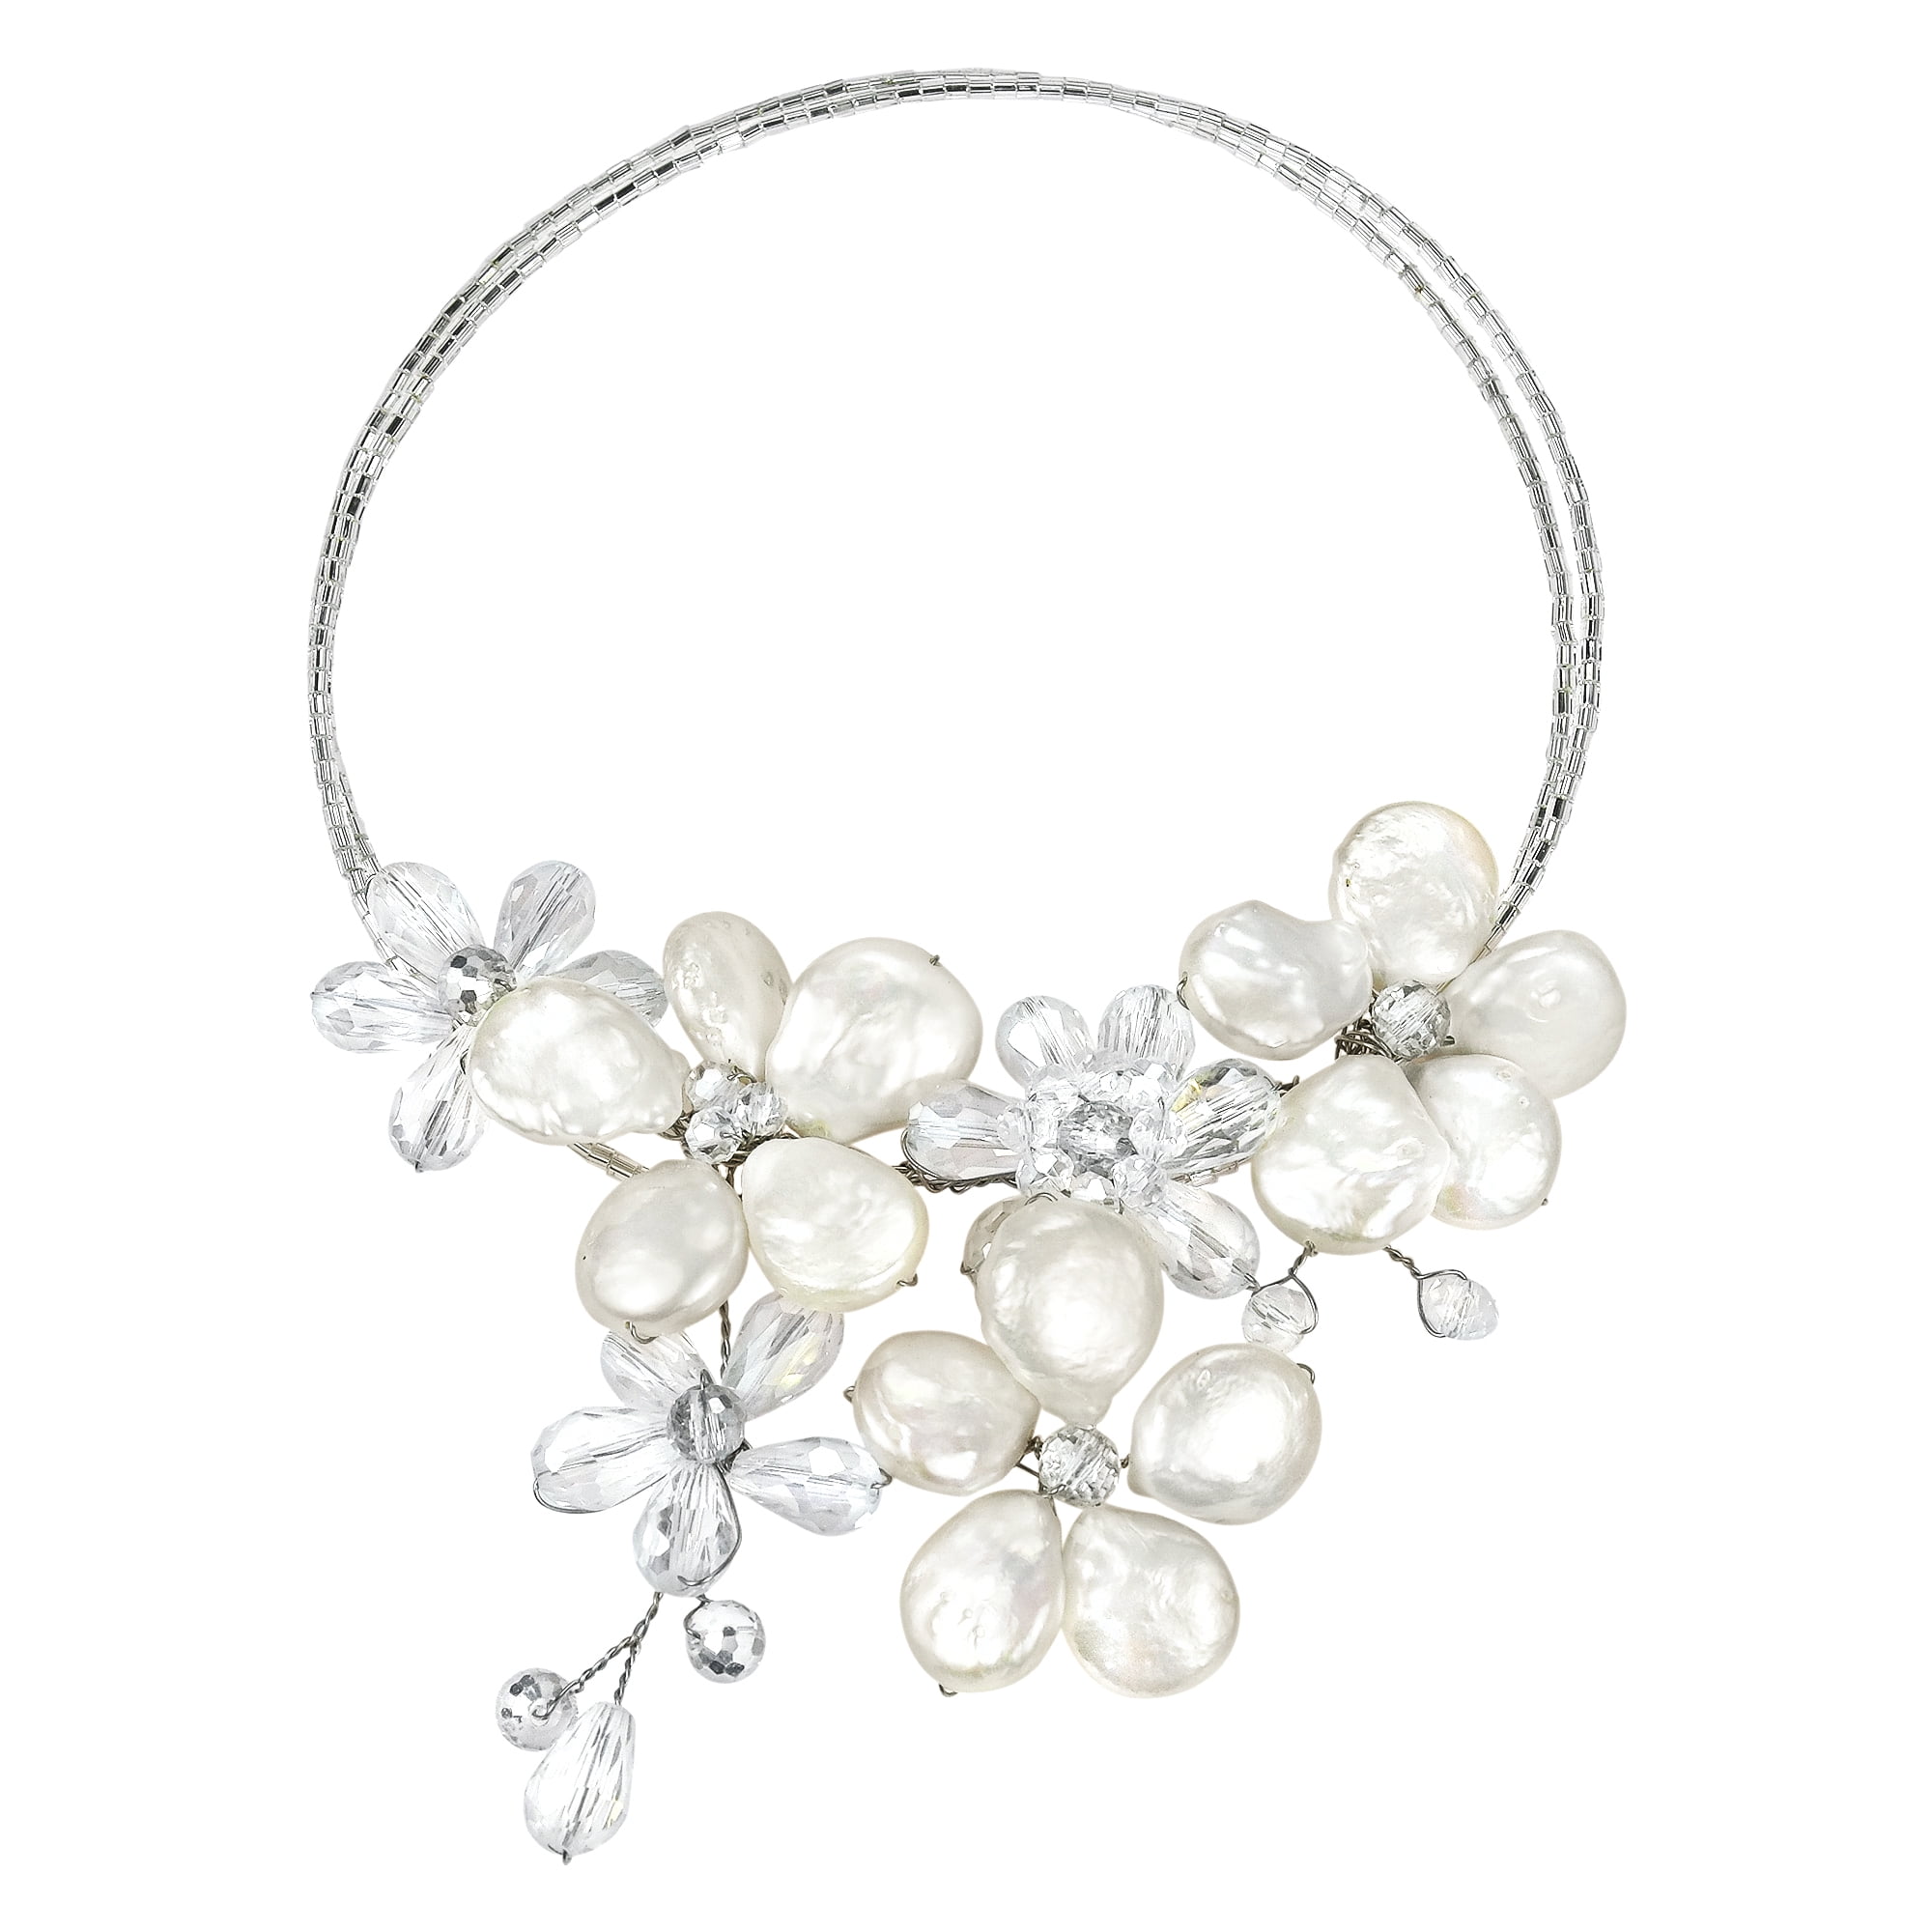 AeraVida Cascading White Lily Flowers Mother of Pearl and Bead Floral Statement Necklace 